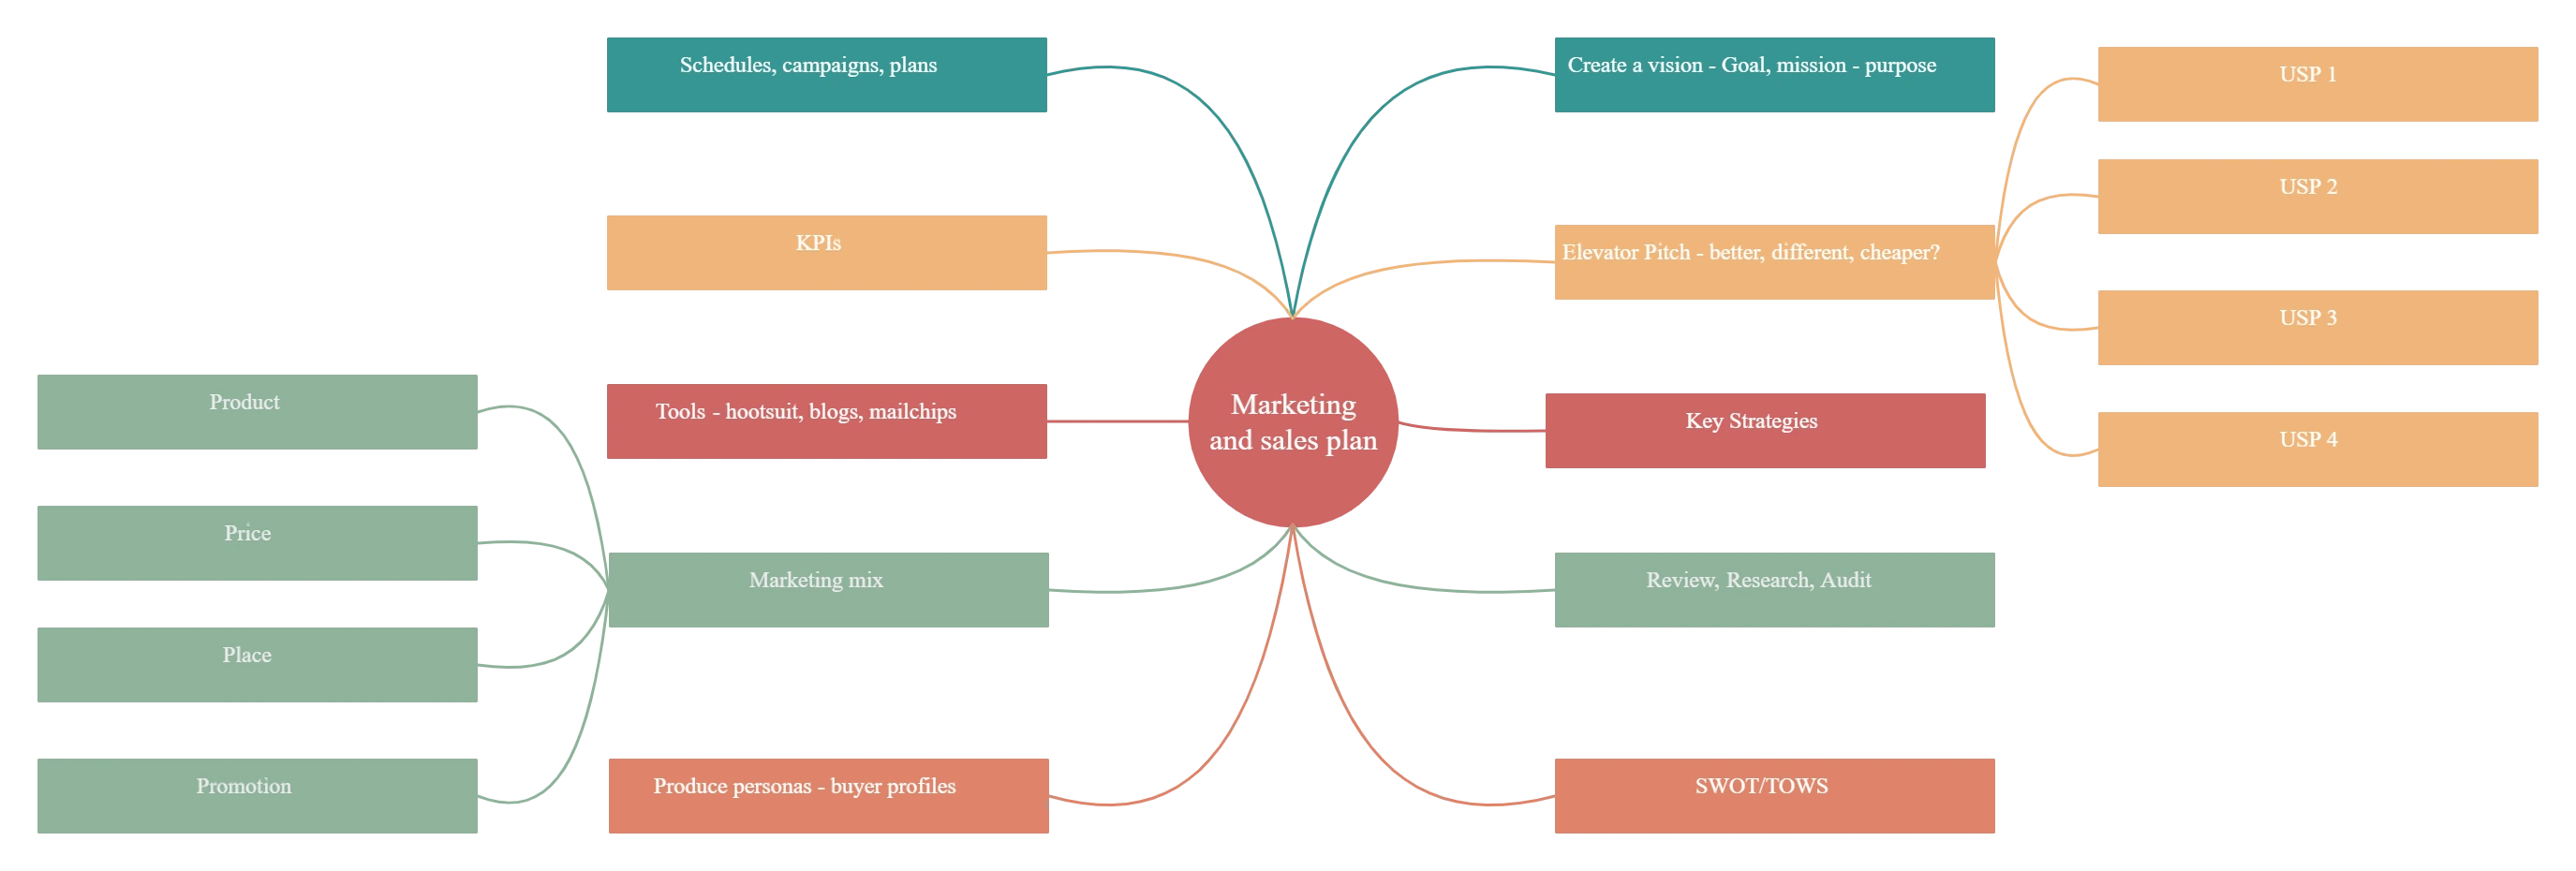 Marketing and Sales Plan template for business presentation